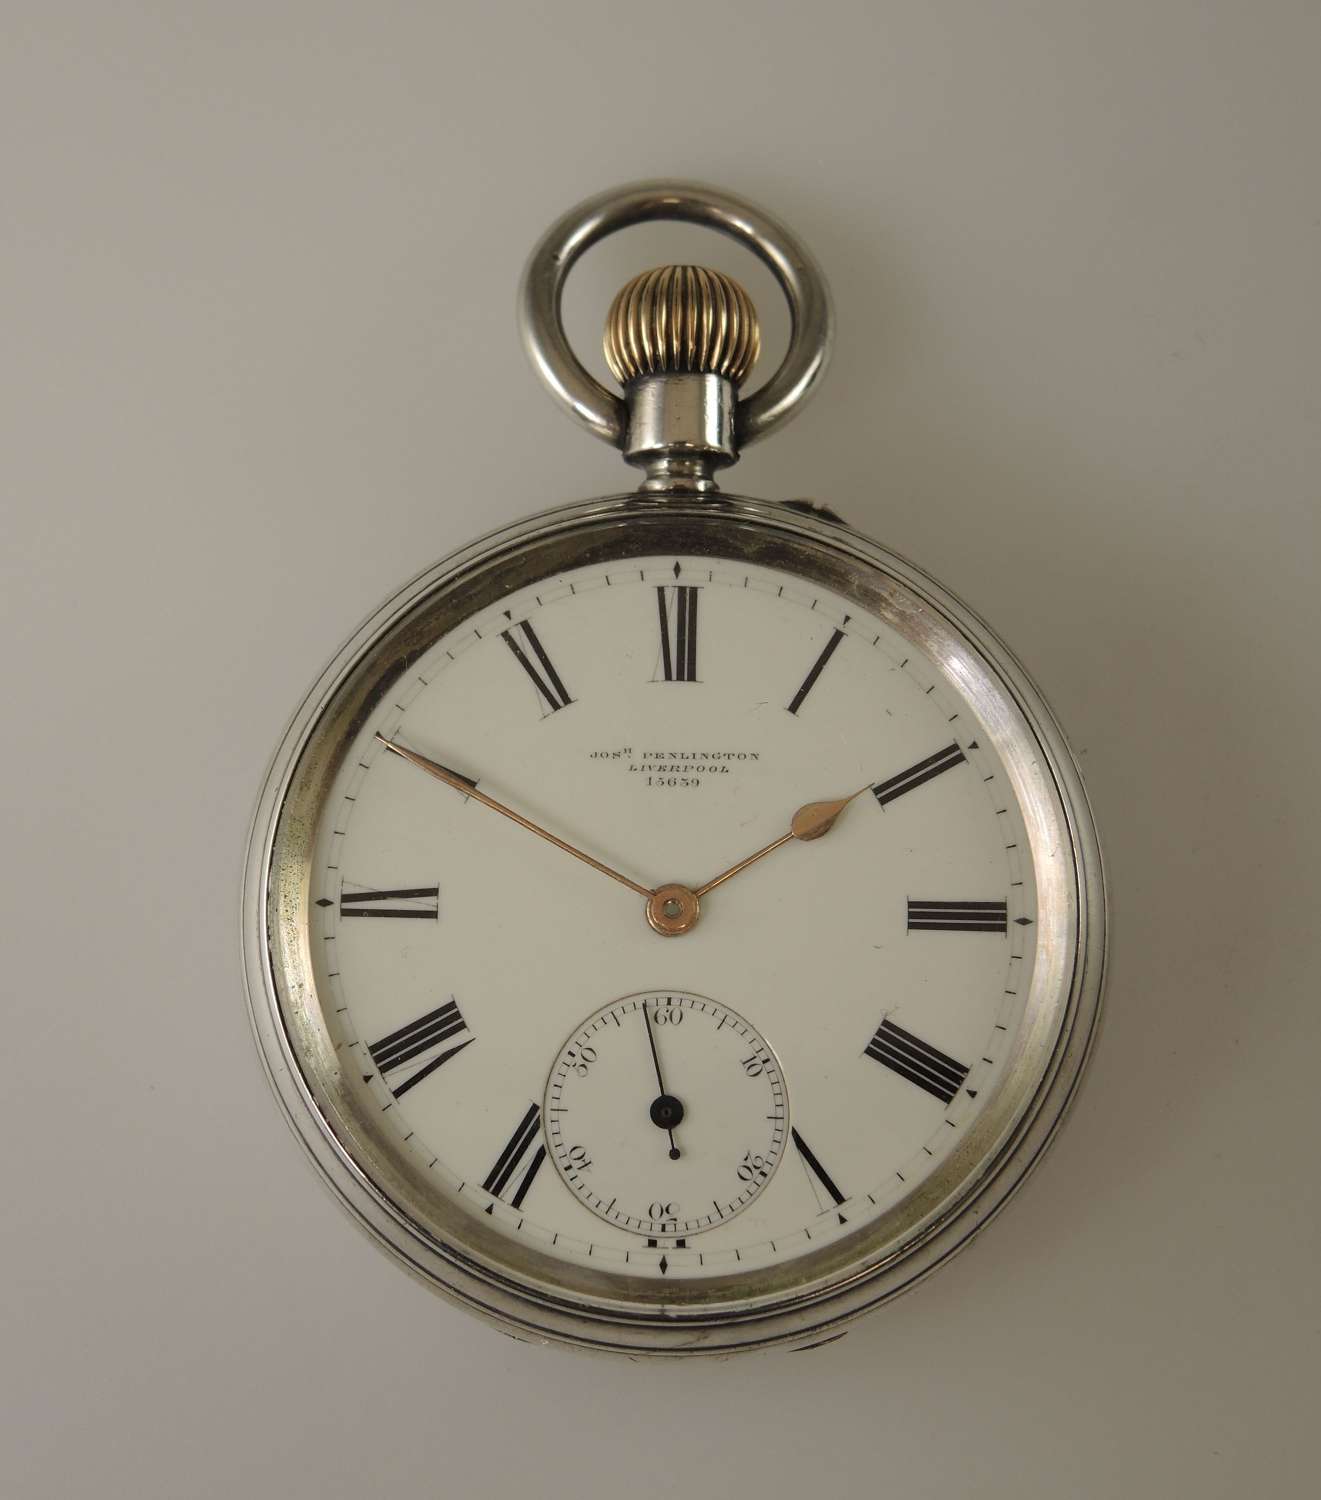 Top Quality English silver pocket watch by Jos Penlington c1882